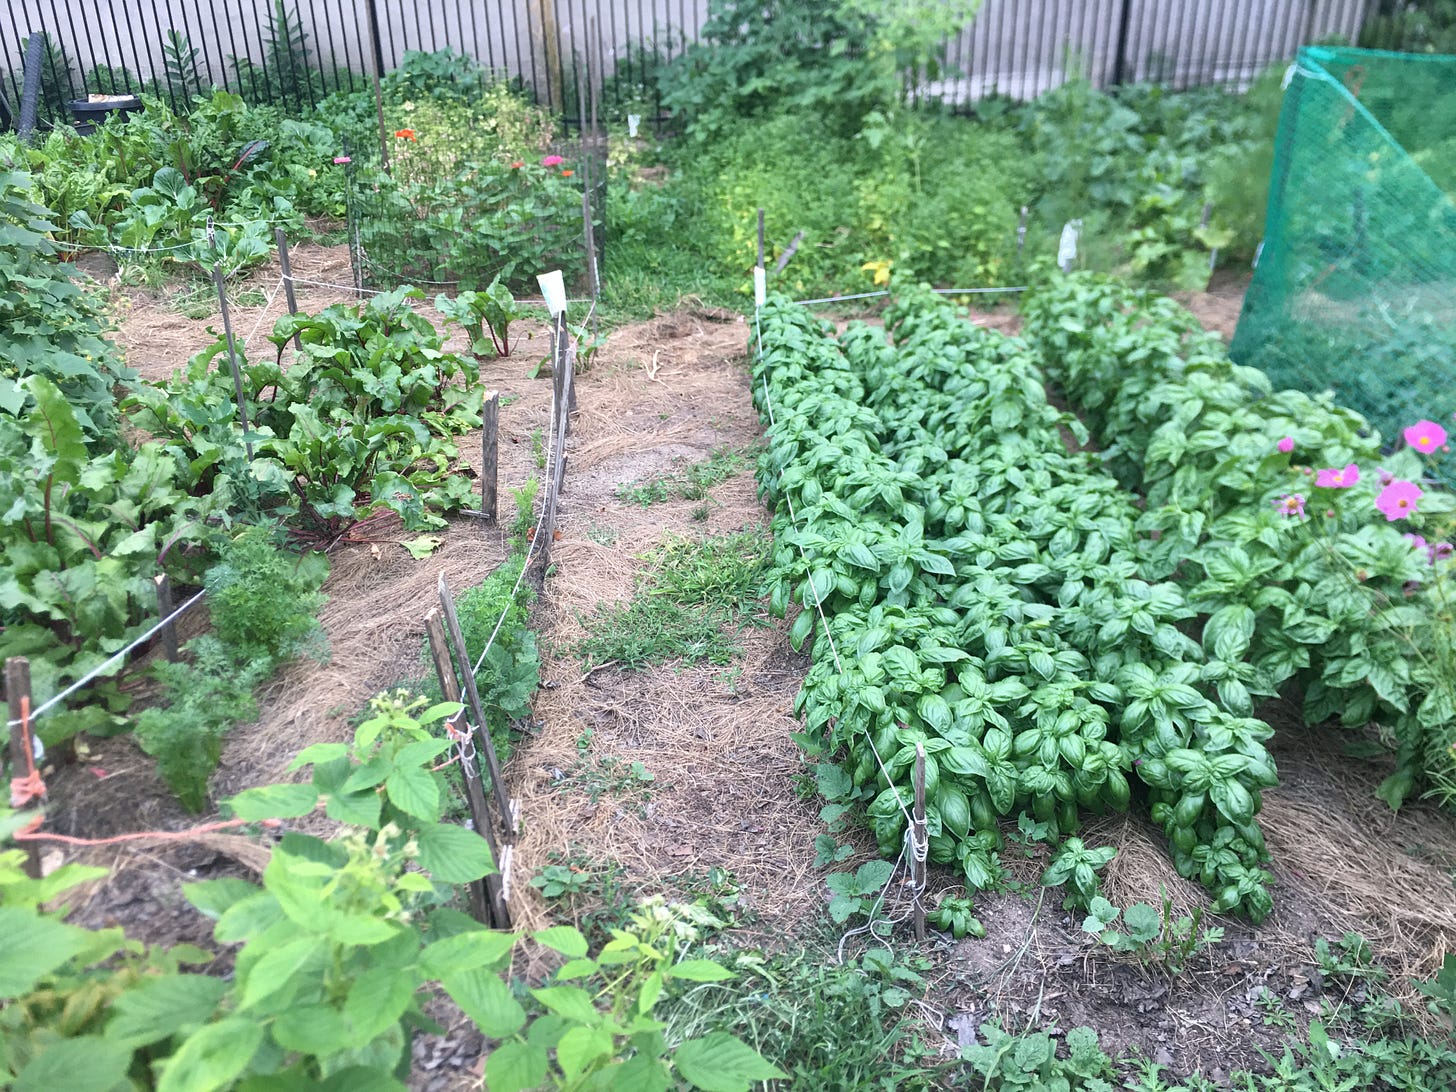 A community garden features plots about 10 foot square, where greens and herbs and flowers are growing side by side, separated by thin ropes that demarcate plots and paths.